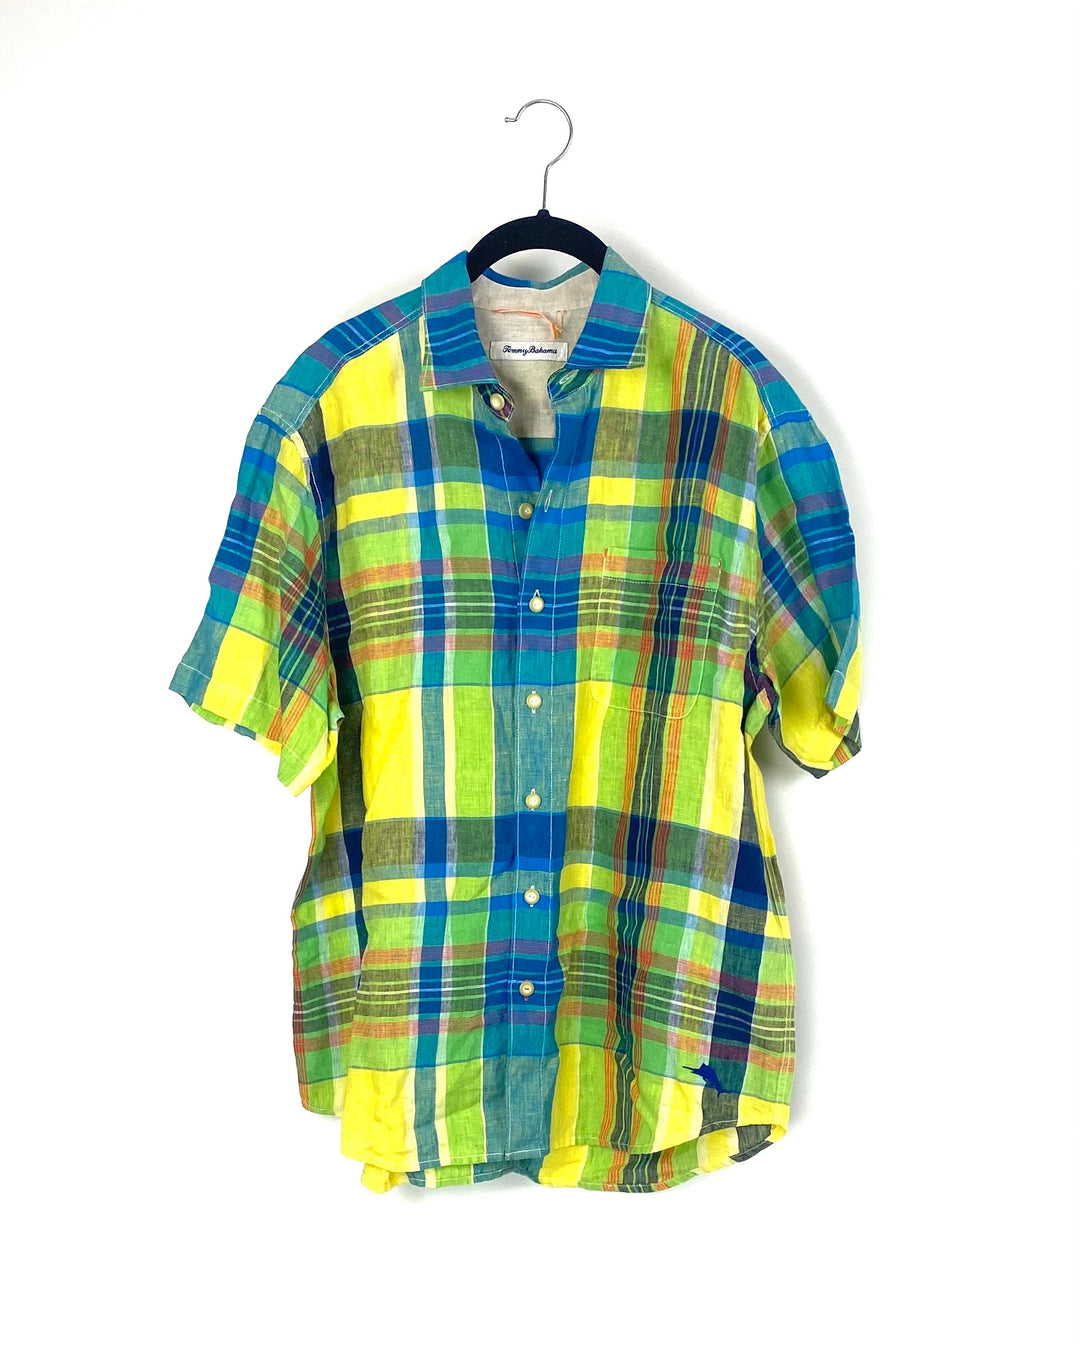 MENS Multicolor Plaid Button Up Top - Small